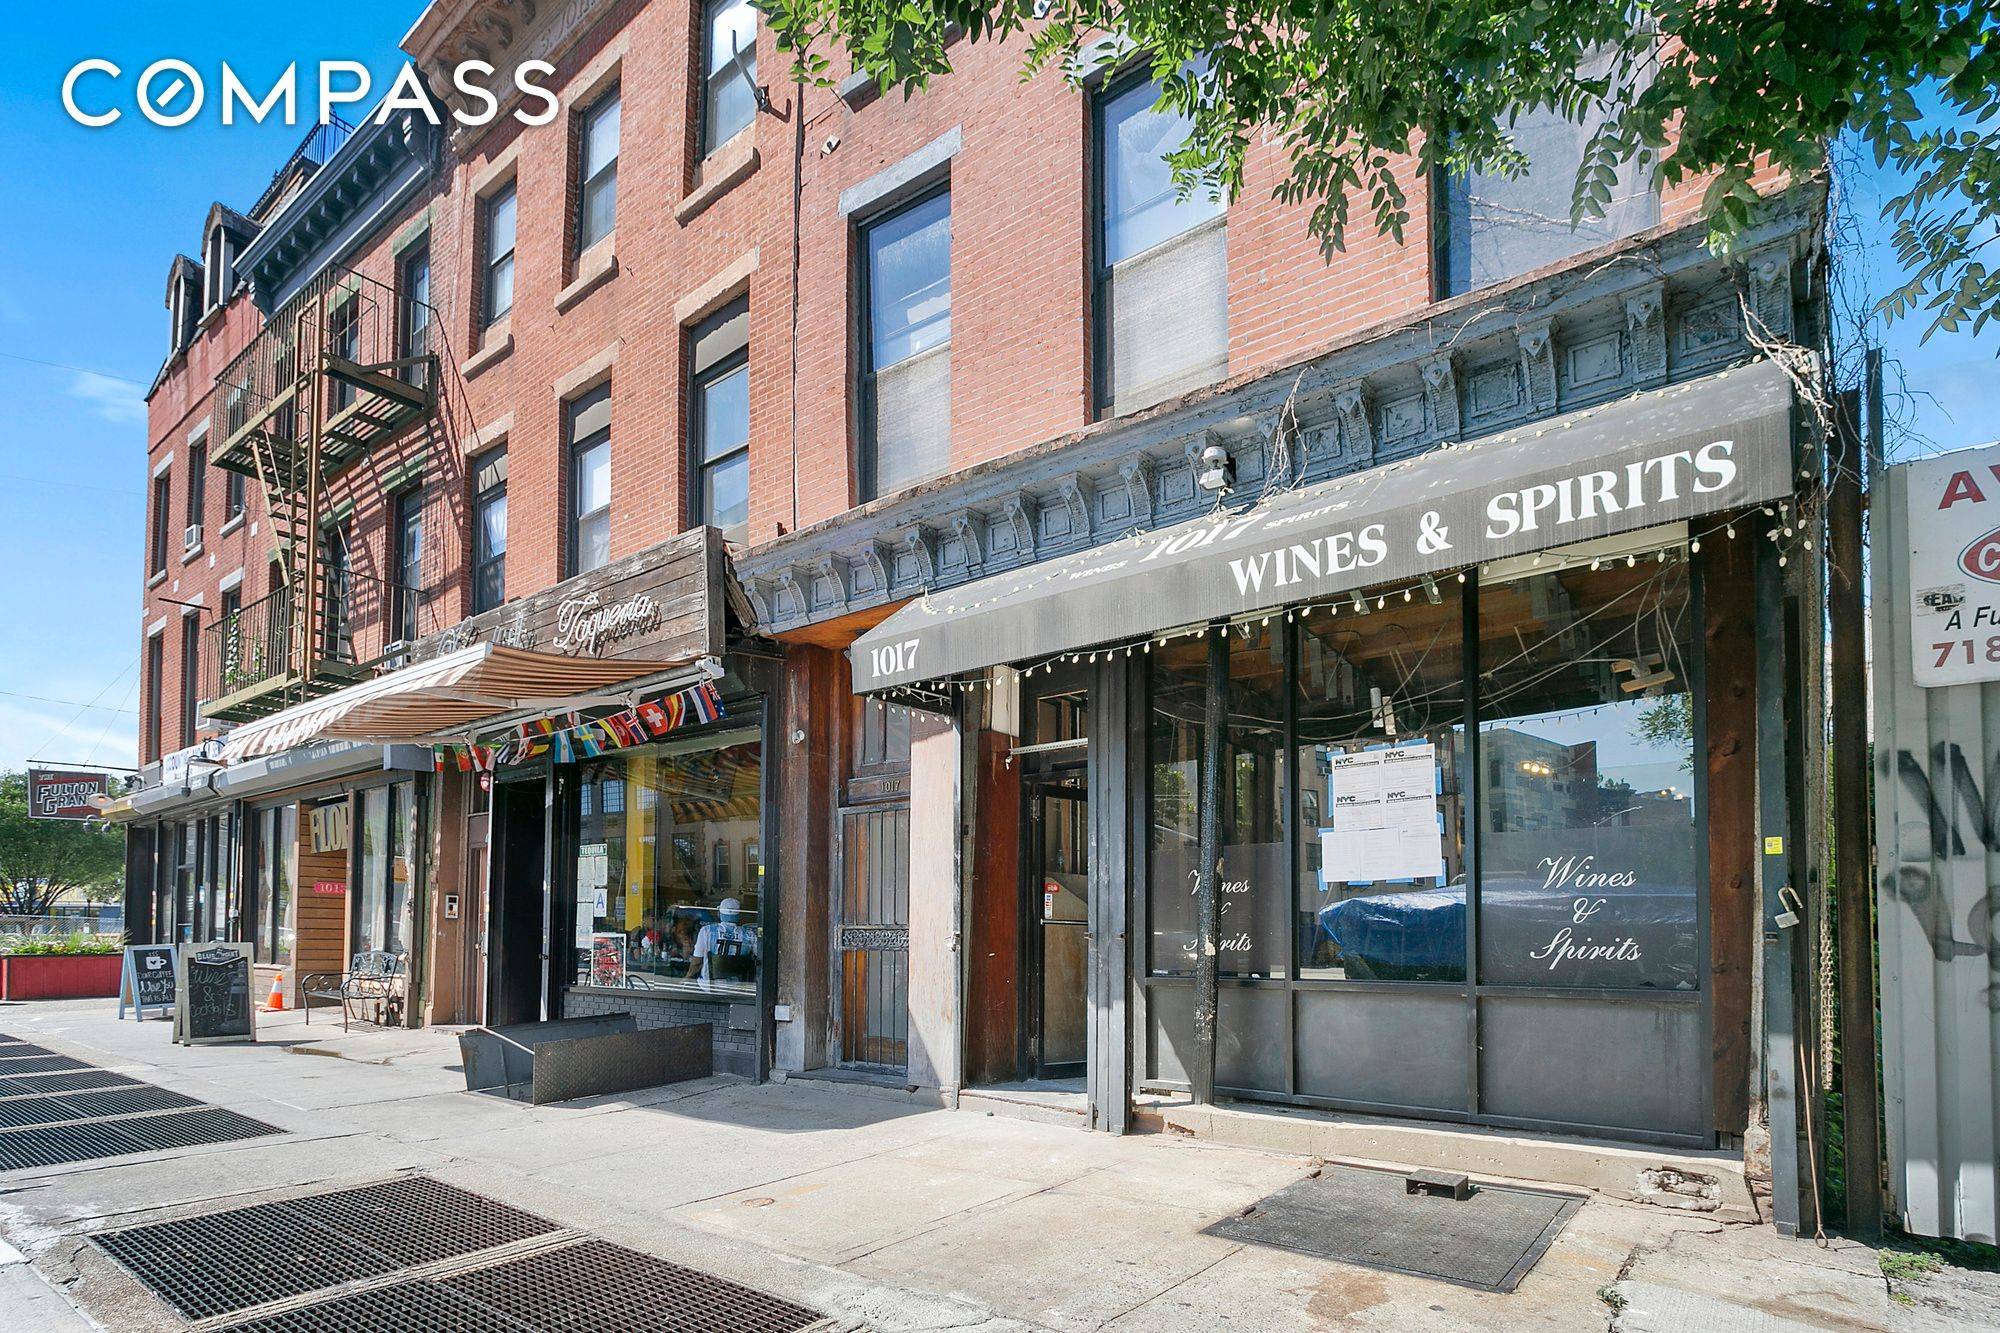 No fee Commercial space for rent along prime pedestrian thoroughfare in Clinton Hill, centrally located to substantial mixed use re development corridor.